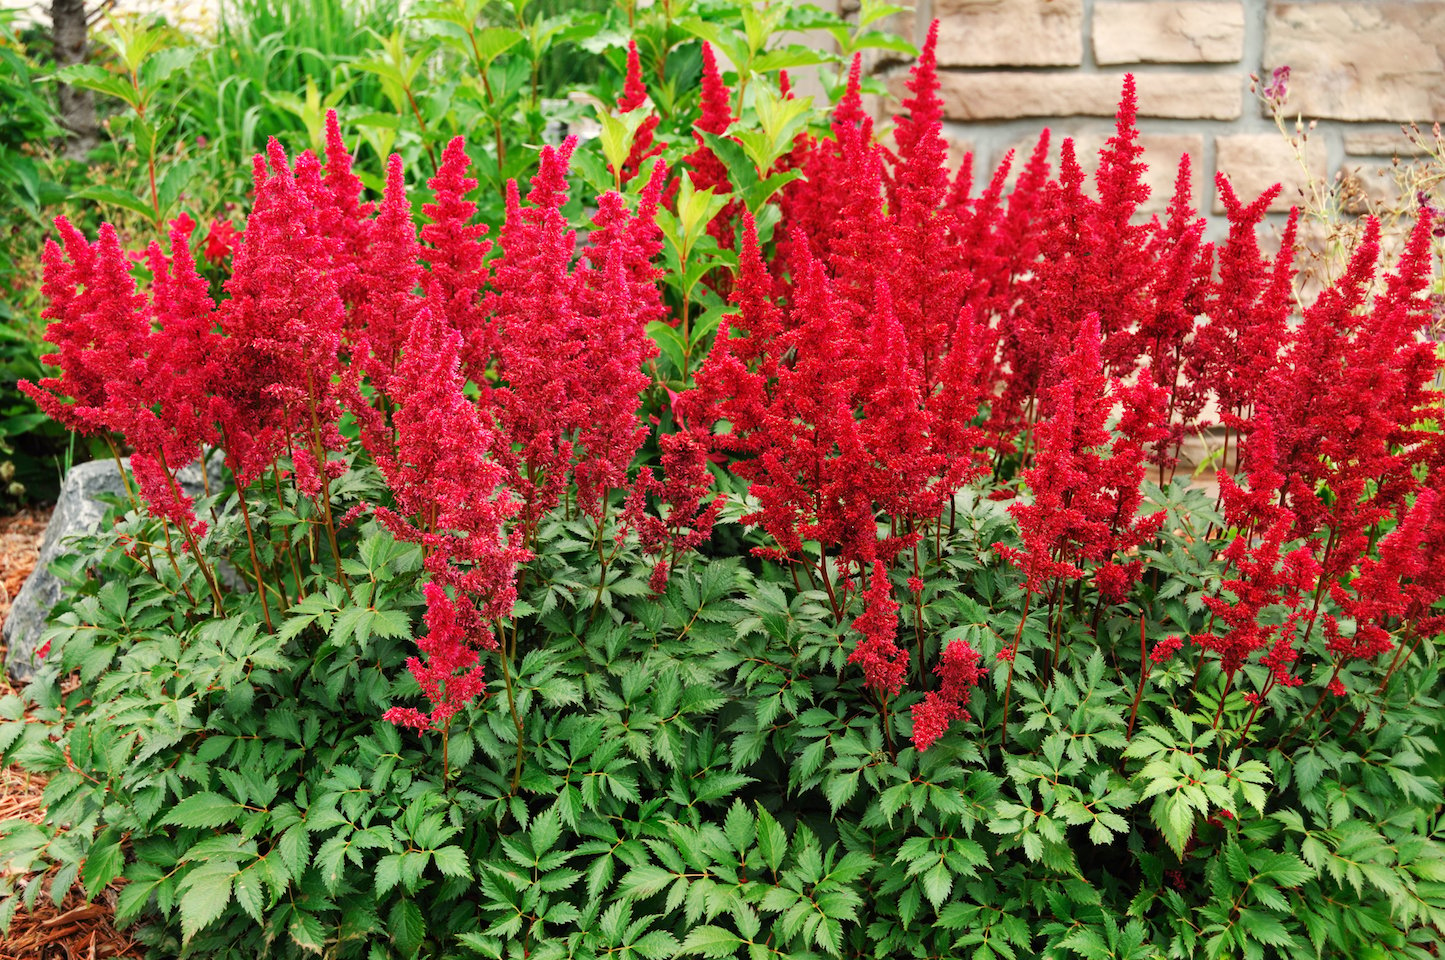 Red Astilbe in a garden against a brick wall.